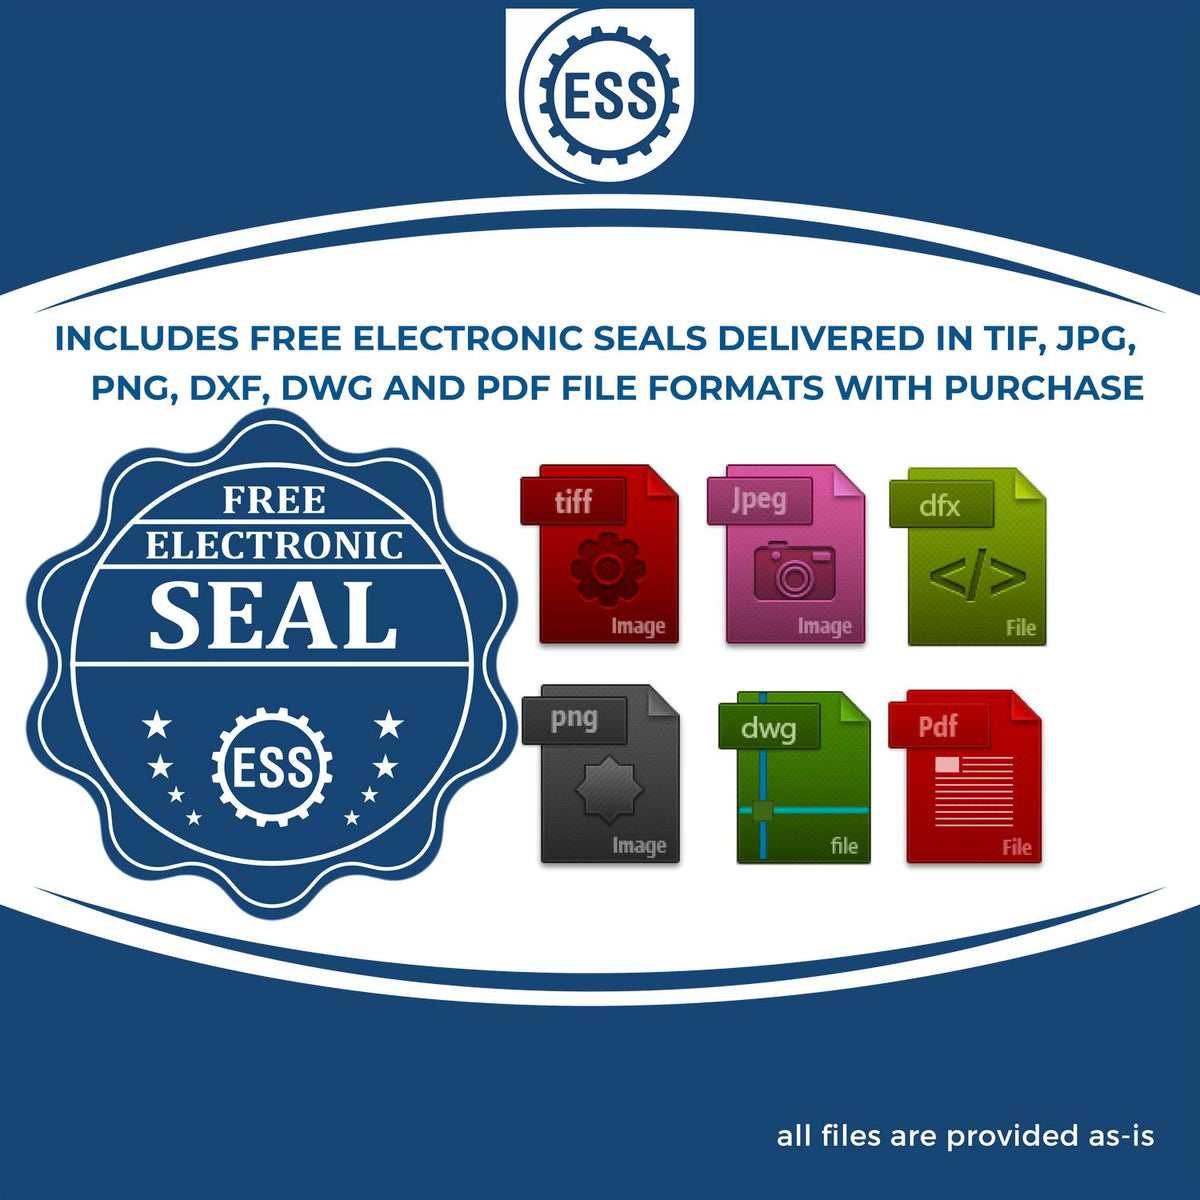 An infographic for the free electronic seal for the Hybrid New Mexico Architect Seal illustrating the different file type icons such as DXF, DWG, TIF, JPG and PNG.